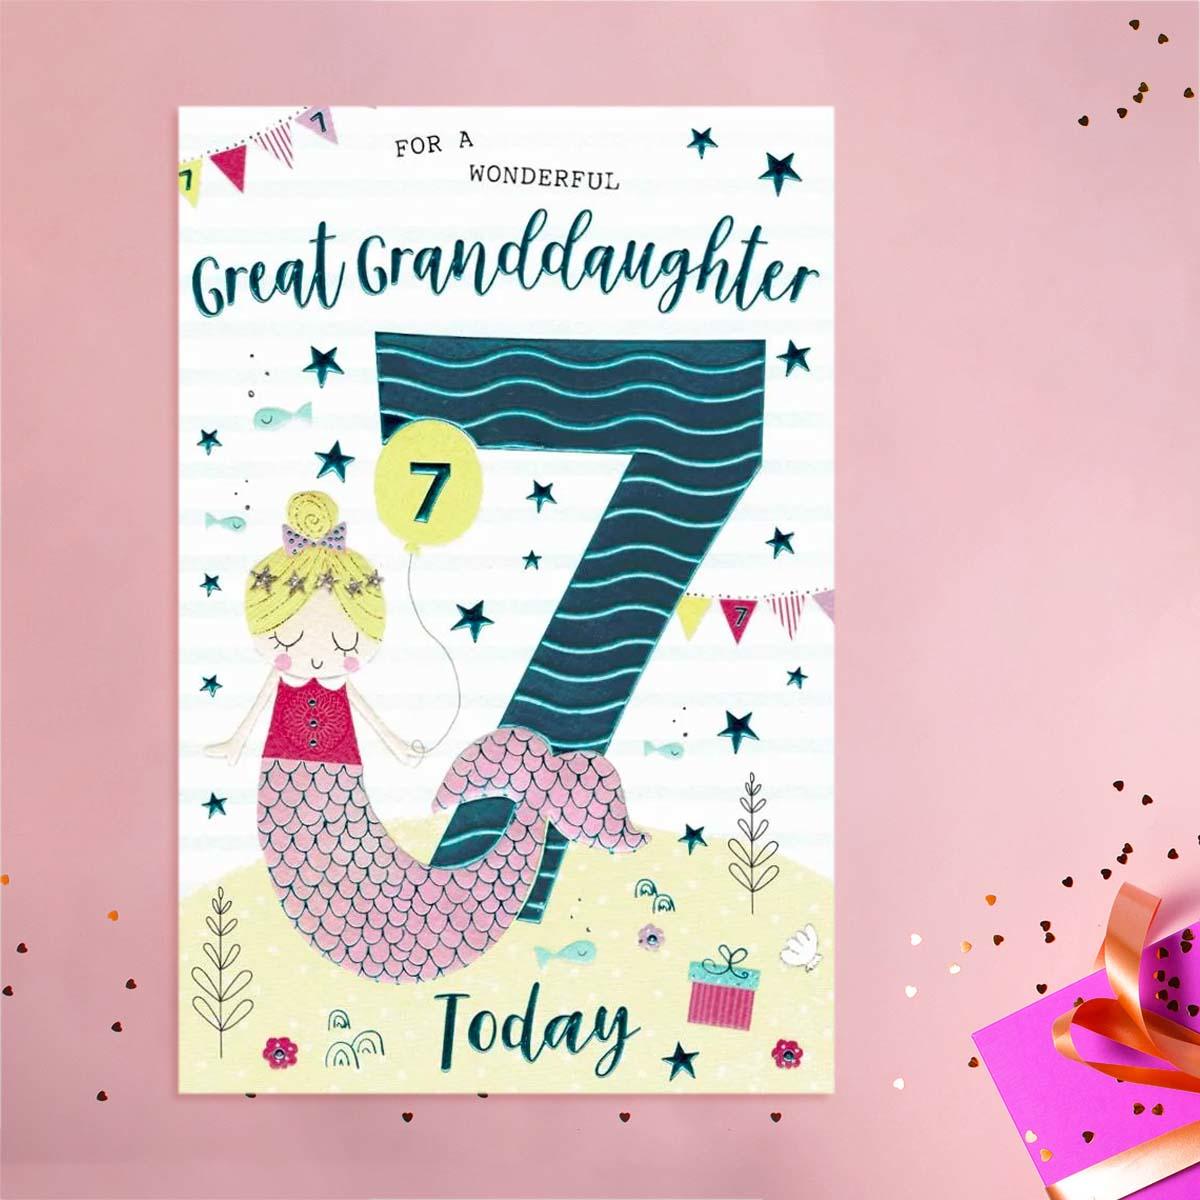 Great Granddaughter Age 7 Birthday Card Front Image